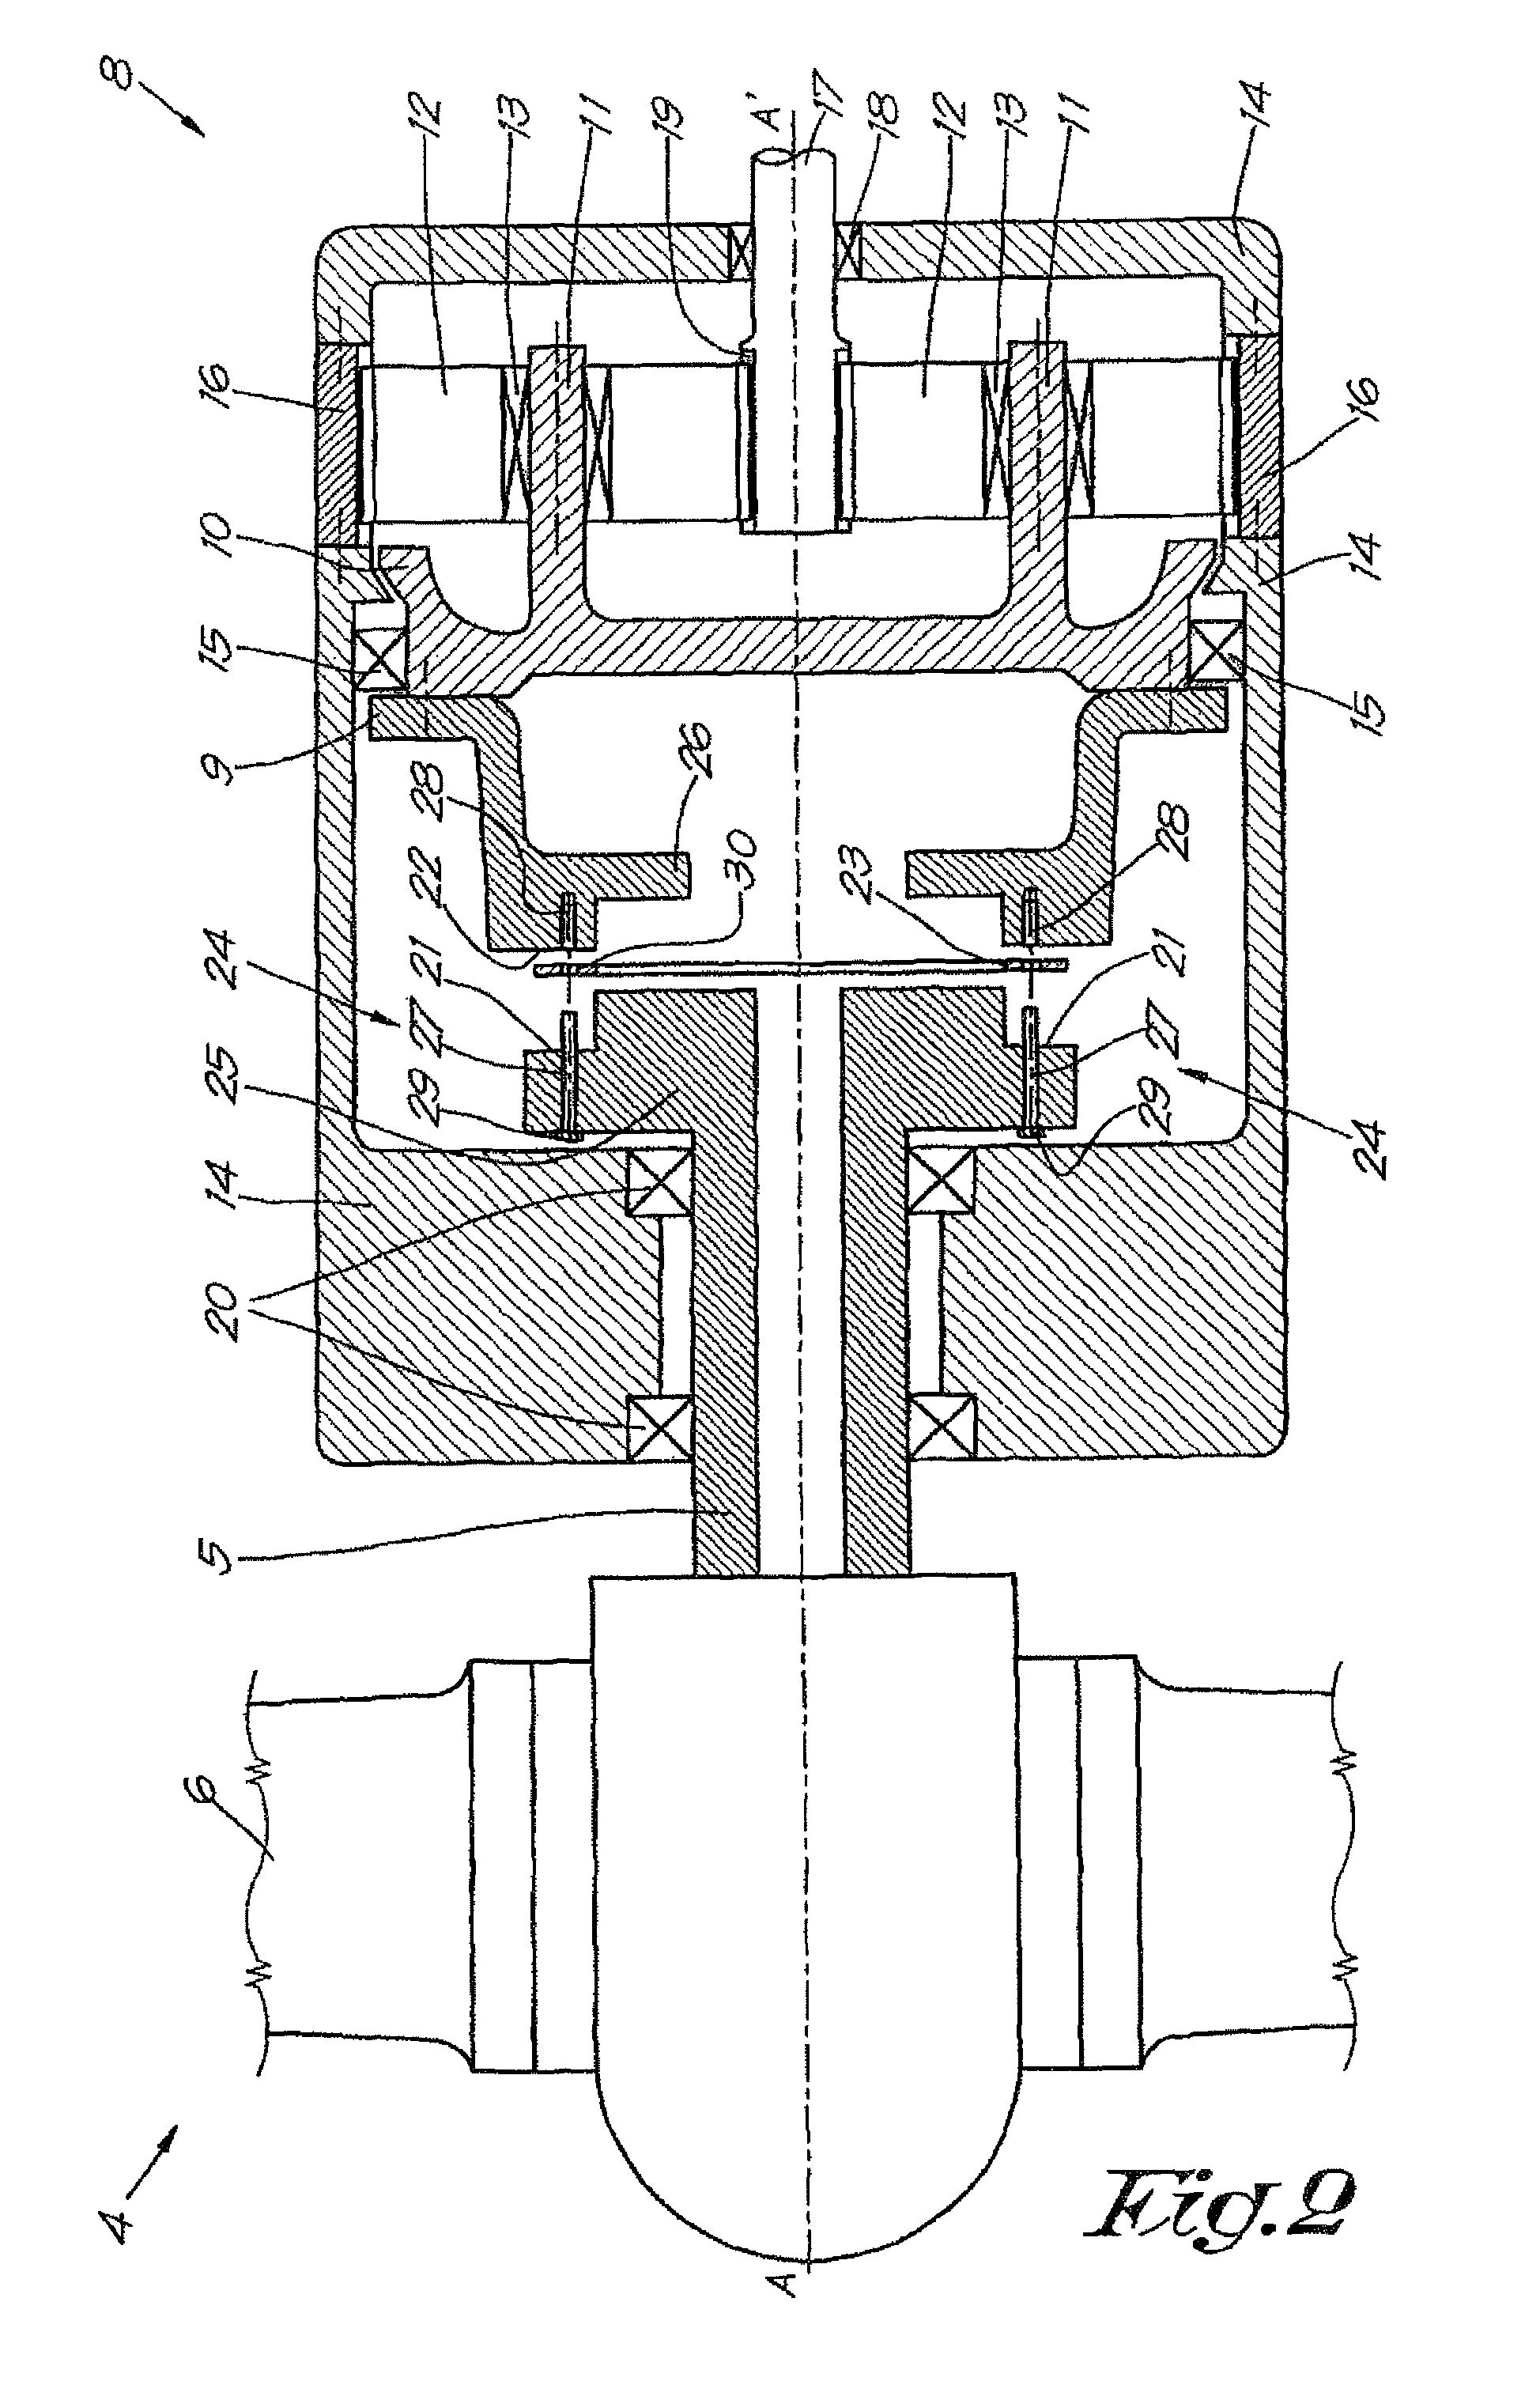 Method for connecting a low speed main shaft of a wind turbine to an input shaft of a transmission gearbox of the wind turbine and a connection obtained by said method